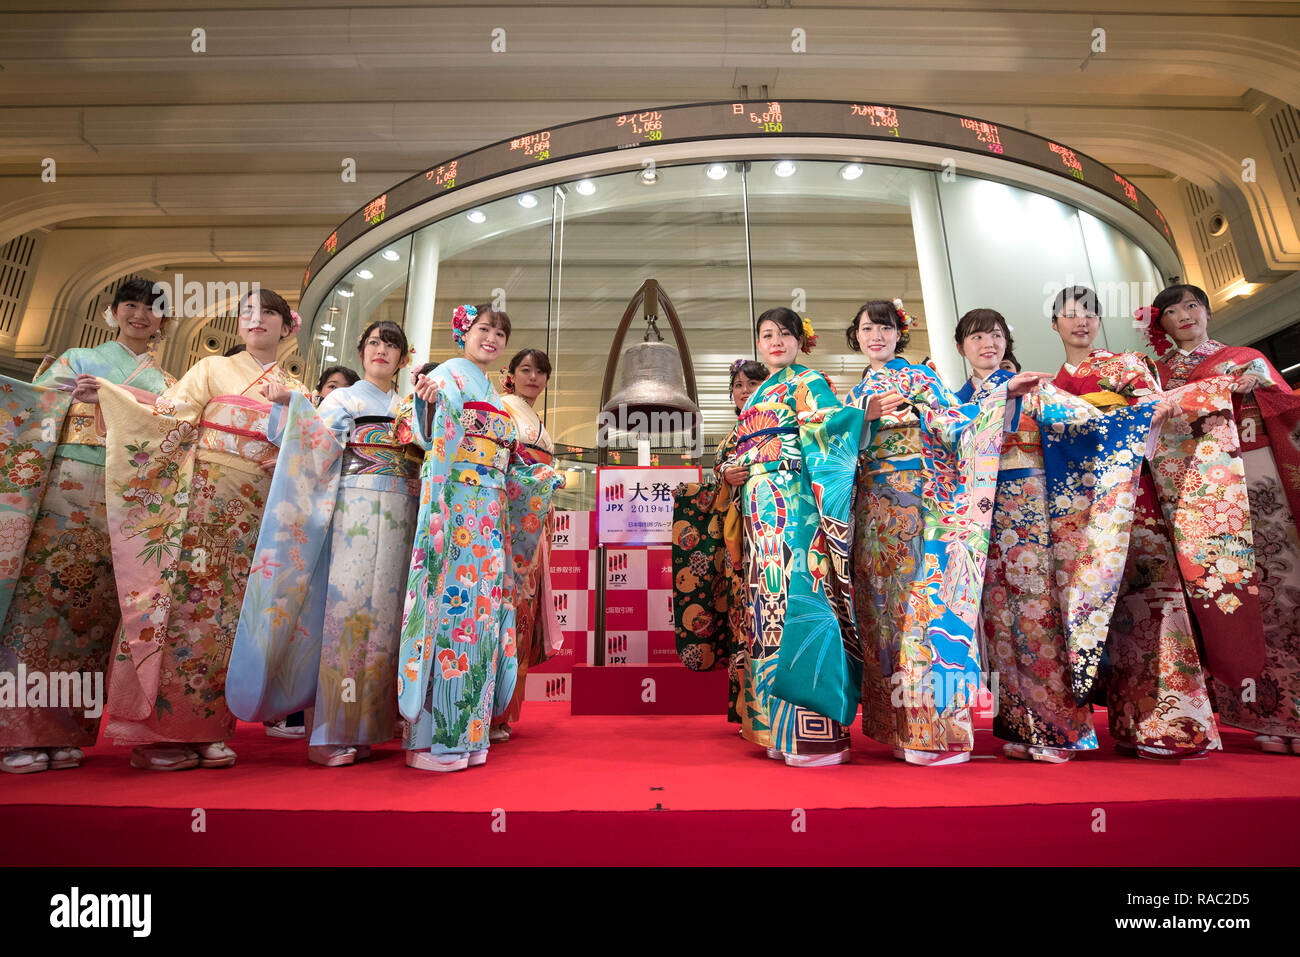 Tokyo, Japan. 4th Jan, 2019. Women in Kimonos pose in front of an electronic board displaying stock prices at the Tokyo Stock Exchange in Tokyo, Japan, Jan. 4, 2019. Tokyo stocks opened sharply lower on Friday, with the benchmark Nikkei stock index tracking an equities rout on Wall Street overnight sparked by Apple Inc. lowering its sales outlook and concerns about a global economic slowdown. Credit: Du Xiaoyi/Xinhua/Alamy Live News Stock Photo